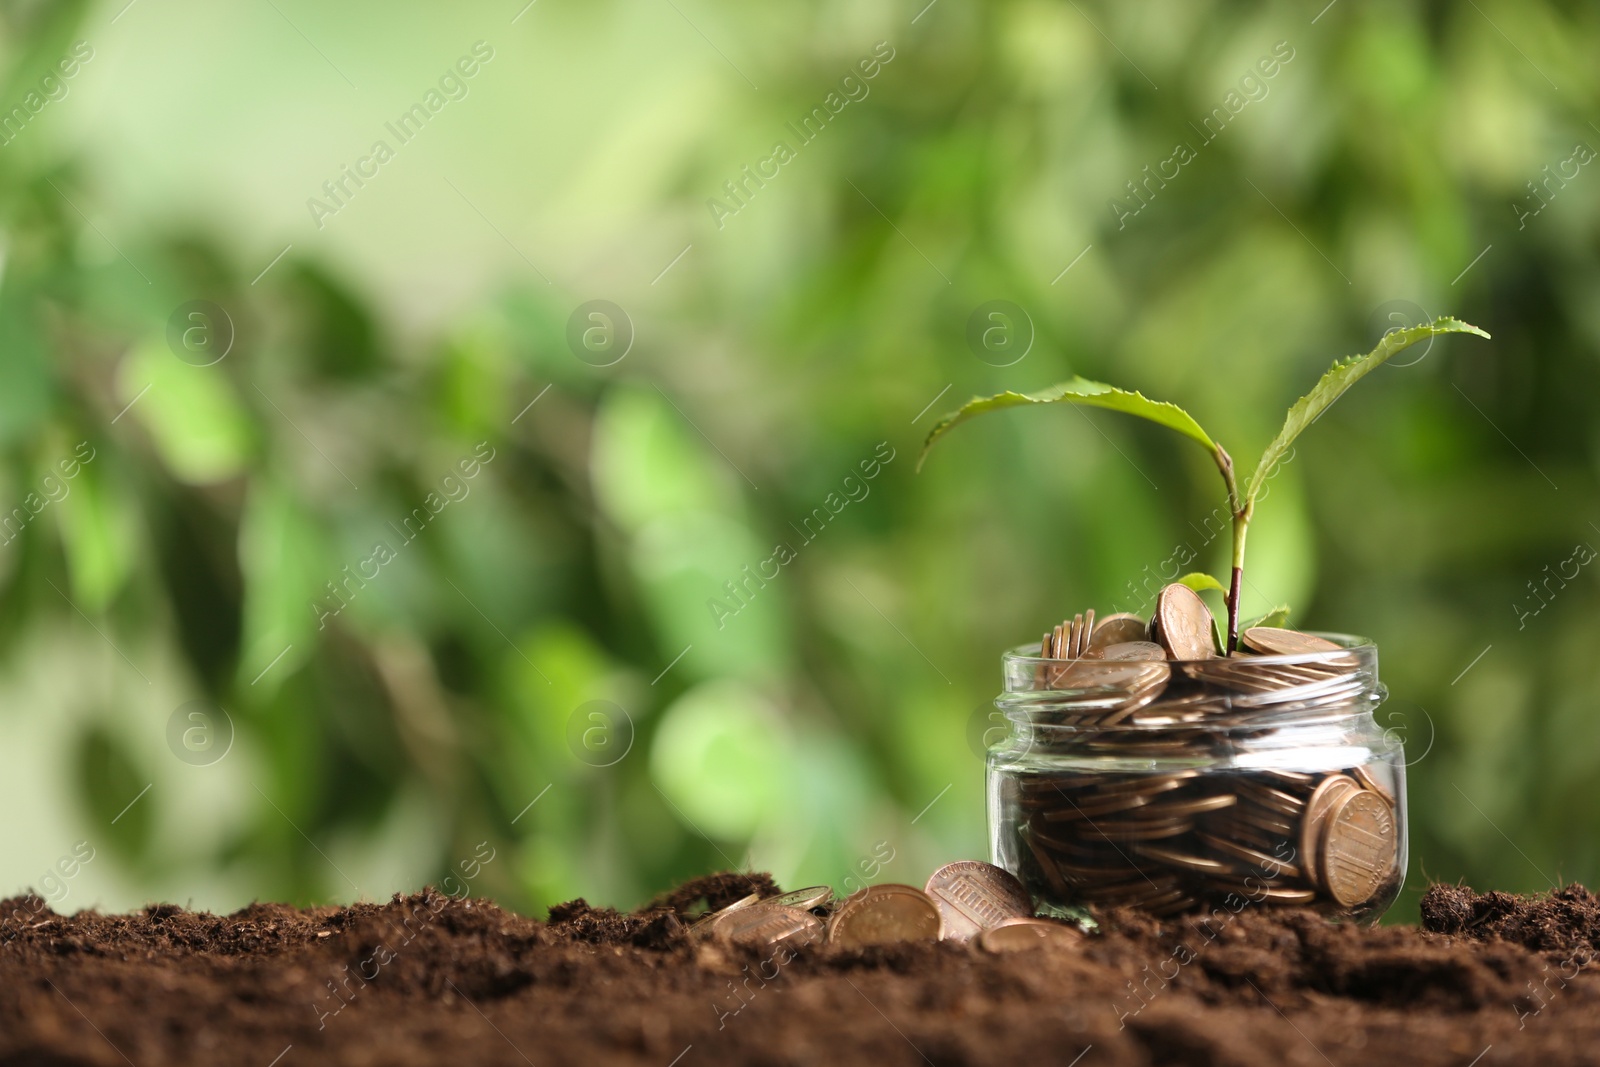 Photo of Coins and green sprout on soil against blurred background, space for text. Money savings